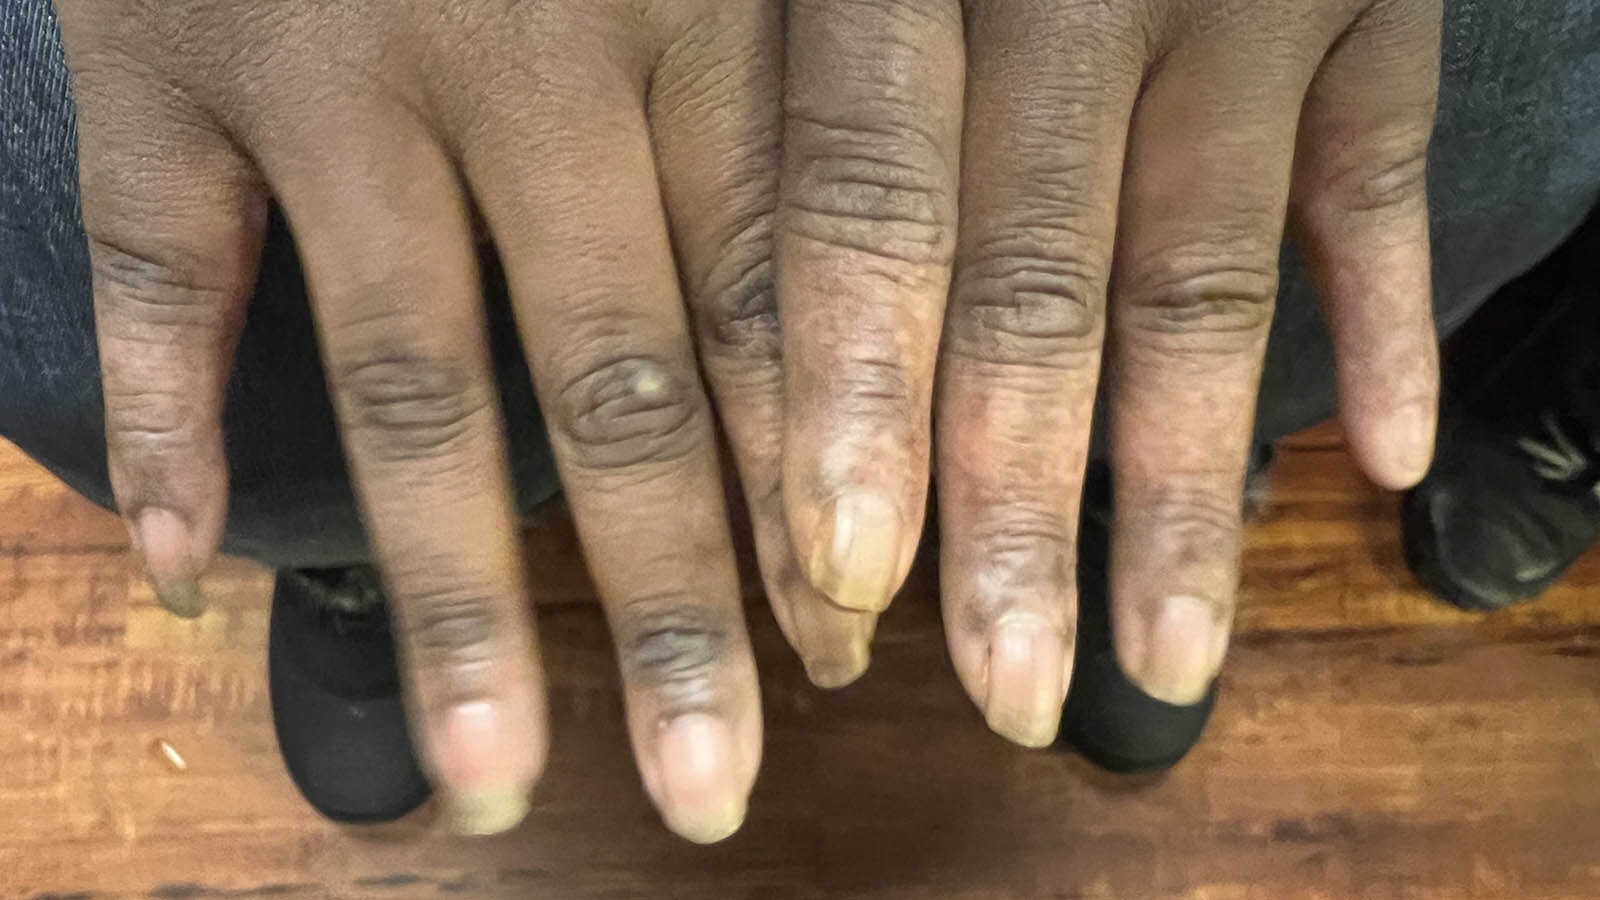 Some of the homeless who sought shelter at True Vine Community Church this past weekend showed up with various levels of frostbite. The severe cases were taken for medical attention.